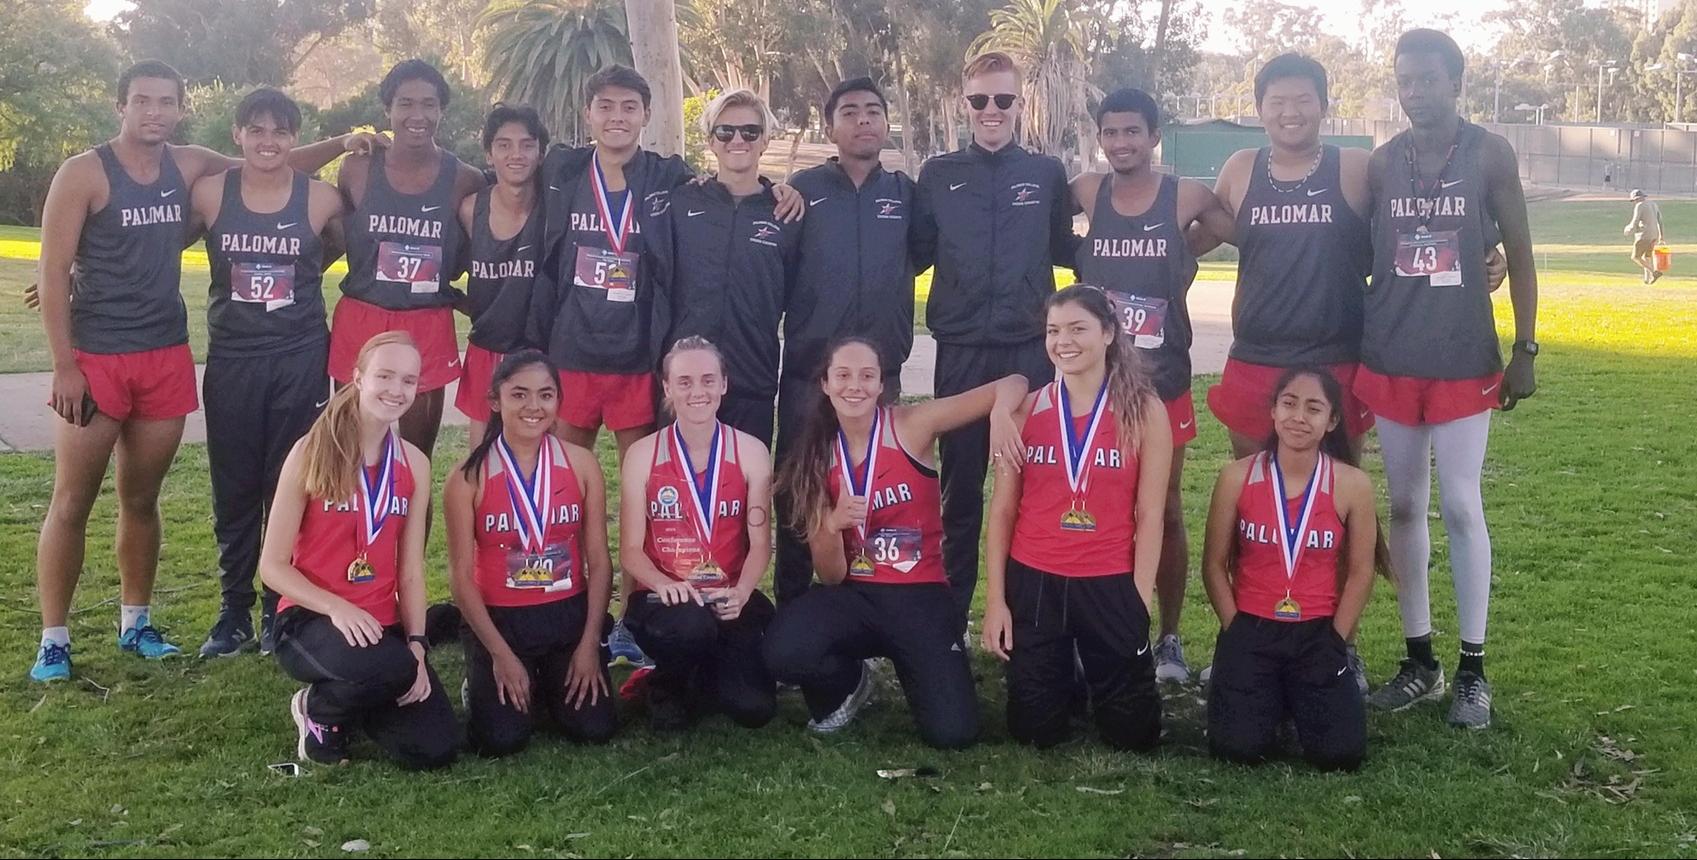 Women run away with PCAC title, men finish in fourth